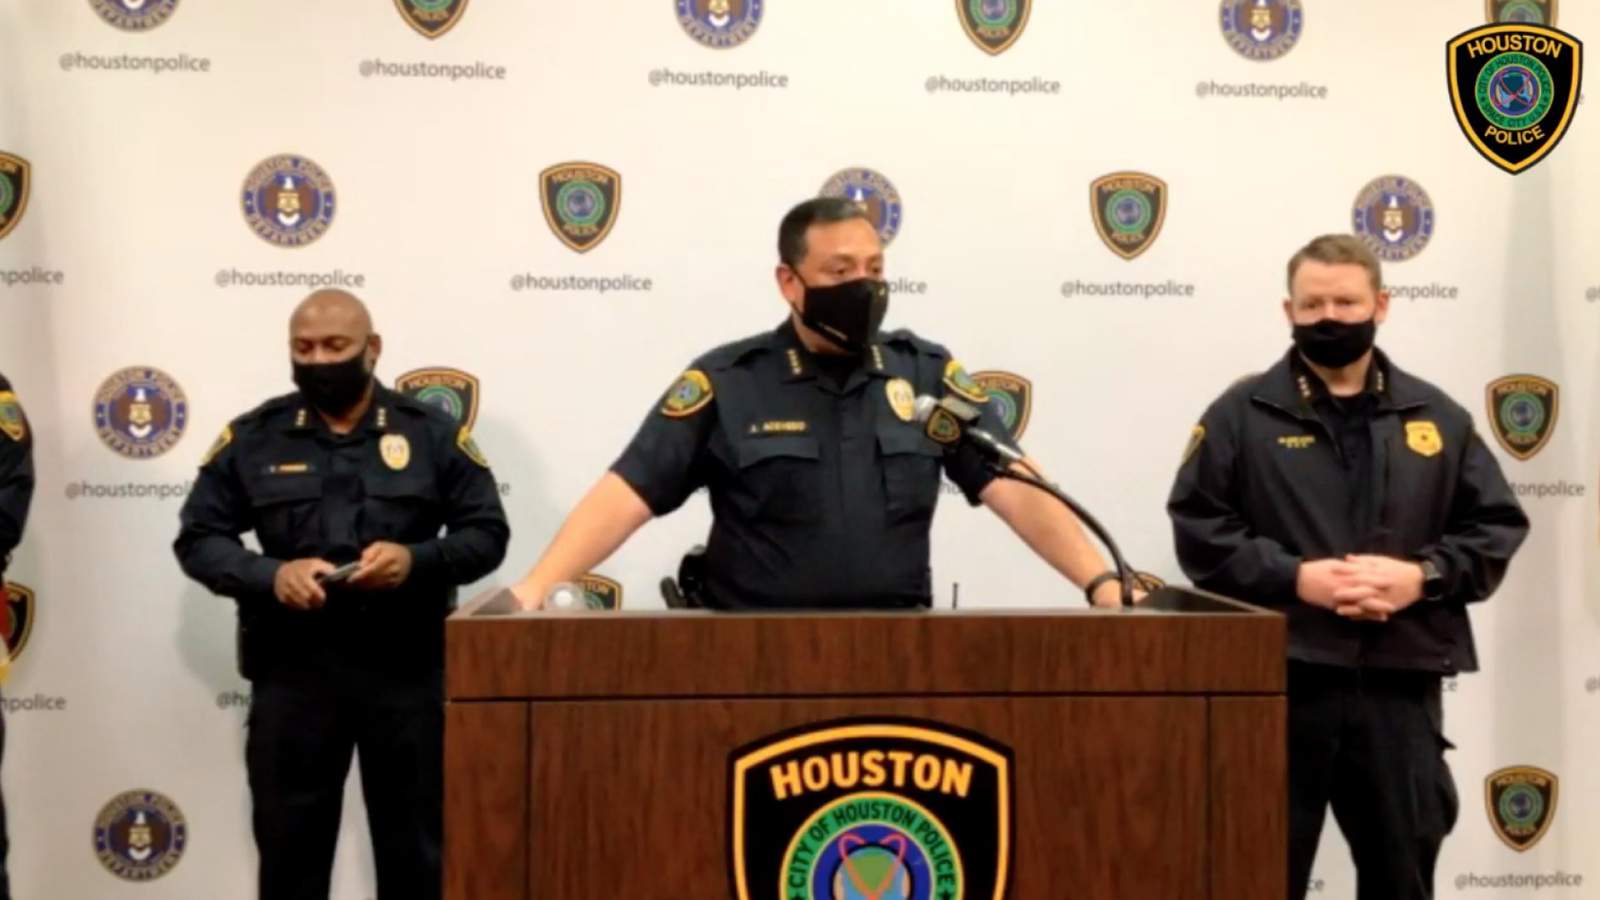 Houston Police Department increases security throughout city ahead of Inauguration Day, Acevedo says